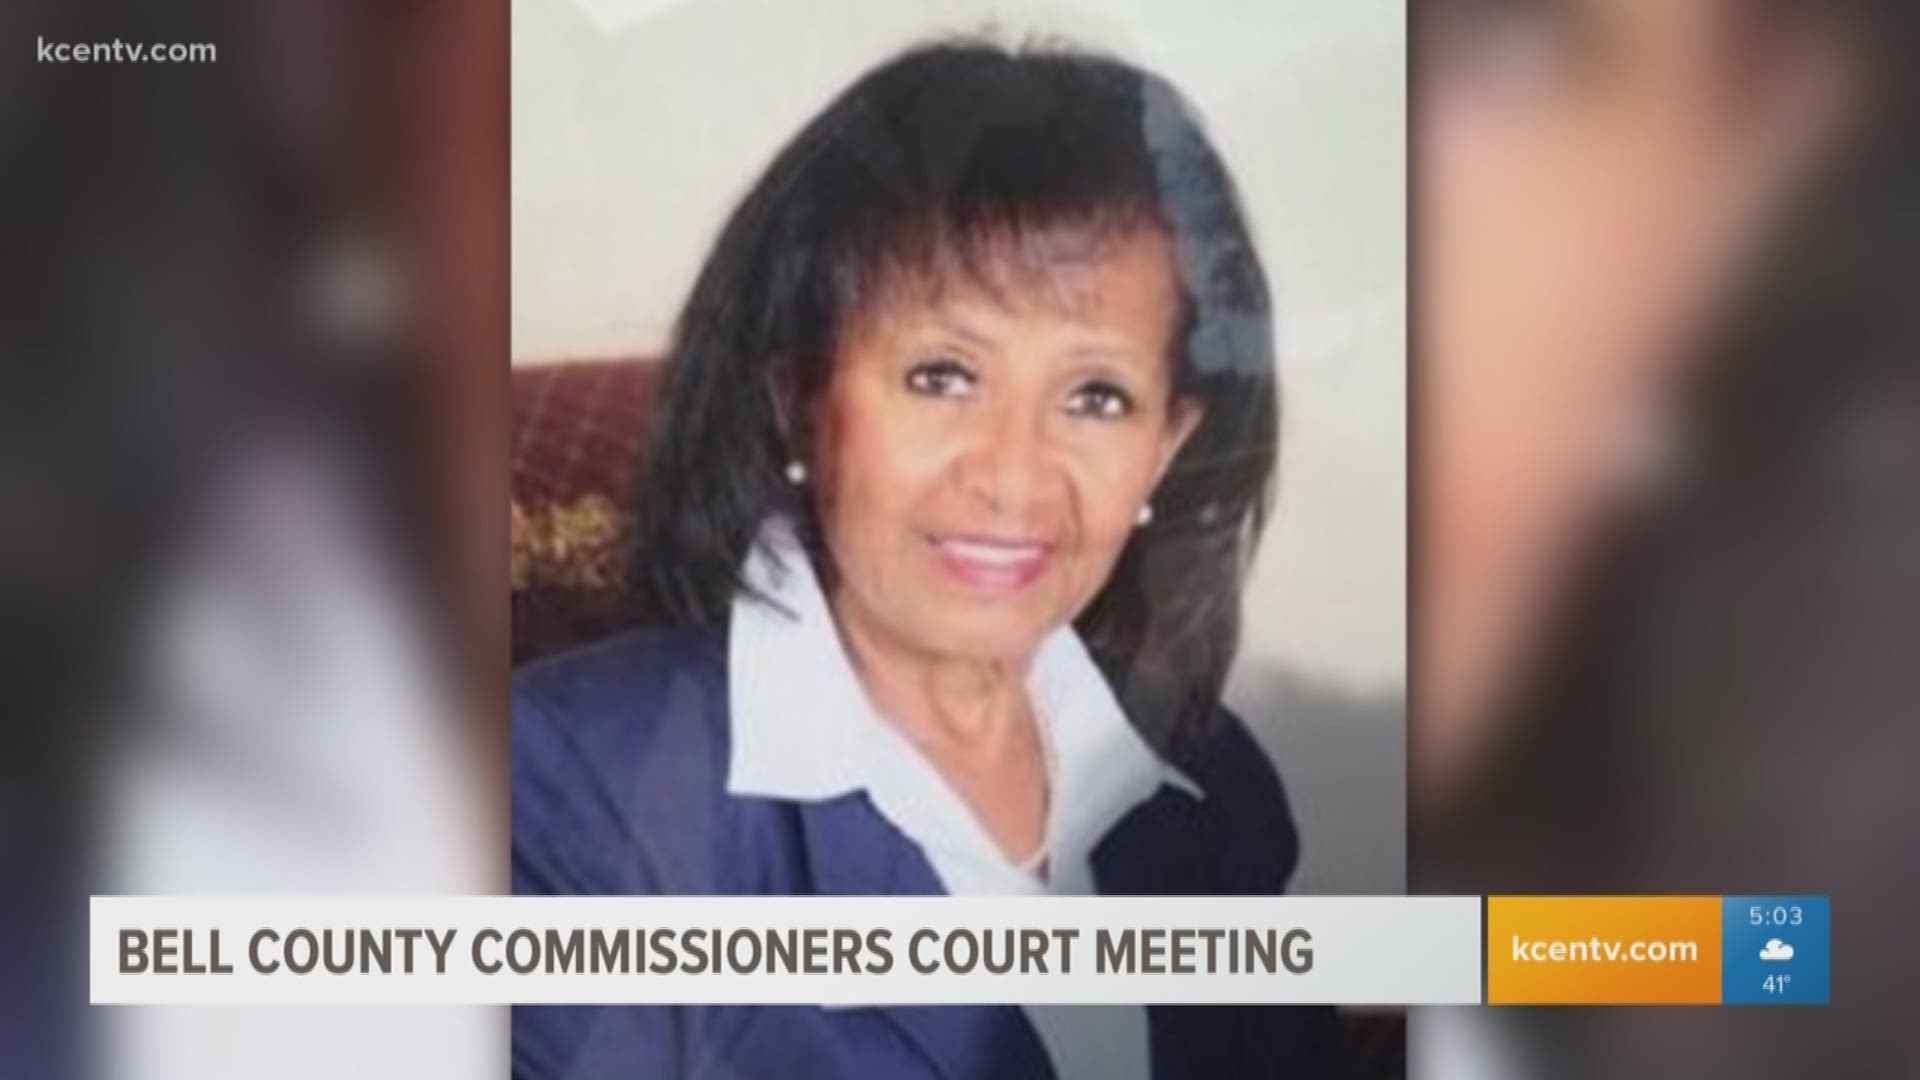 Bell County Commissioners will meet Tuesday morning to discuss filling the vacancy of former Justice of the Peace Claudia Brown.